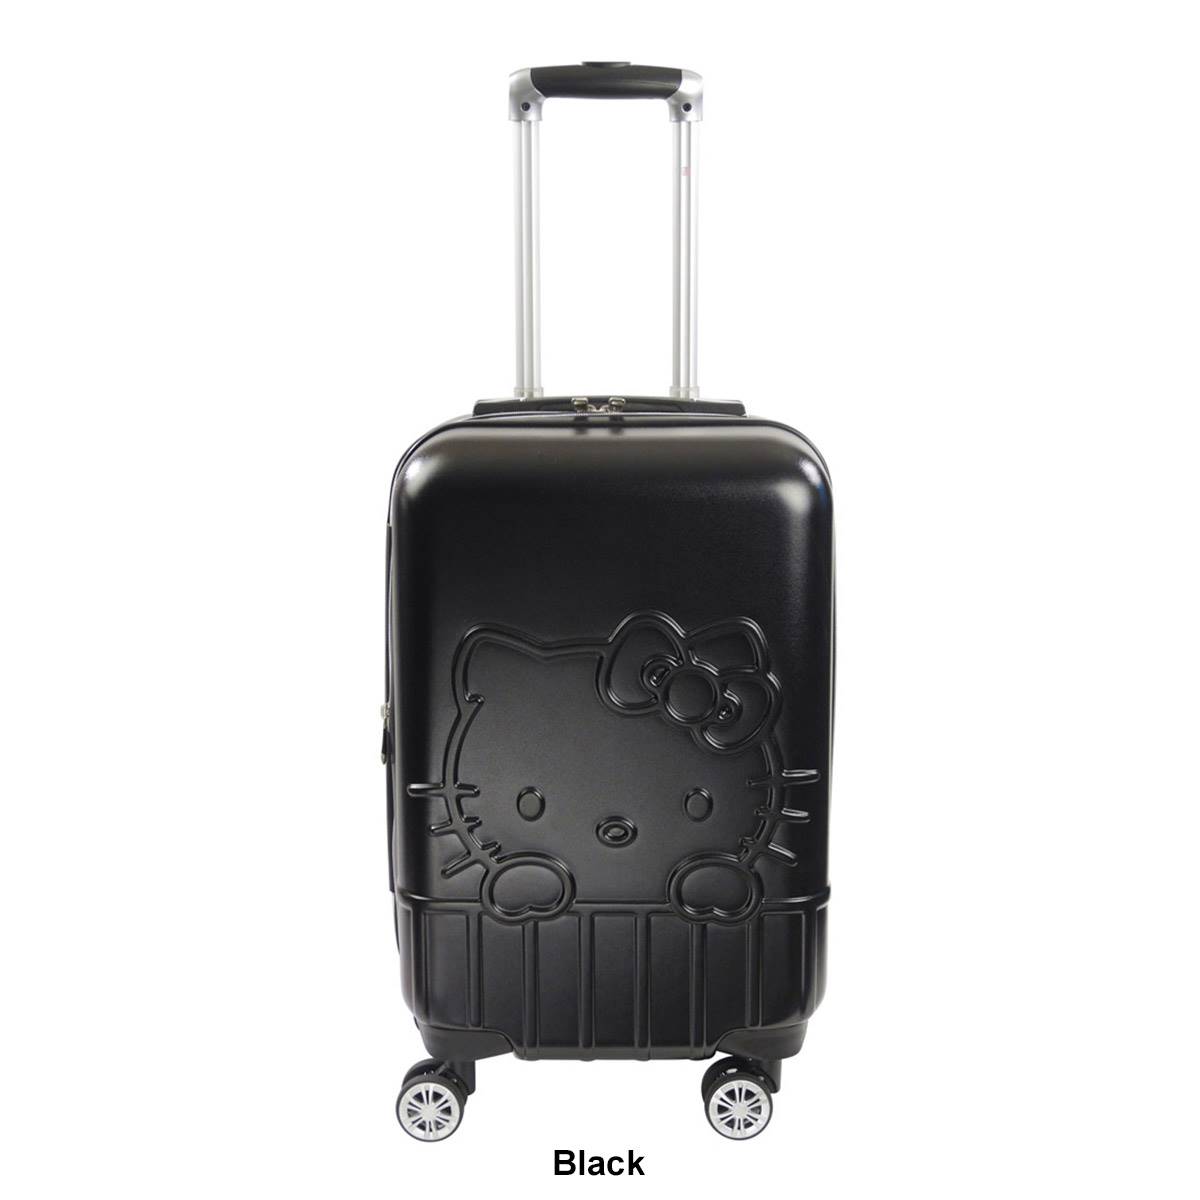 FUL Hello Kitty(R) 21in. Hardside Rolling Carry-On Spinner Luggage